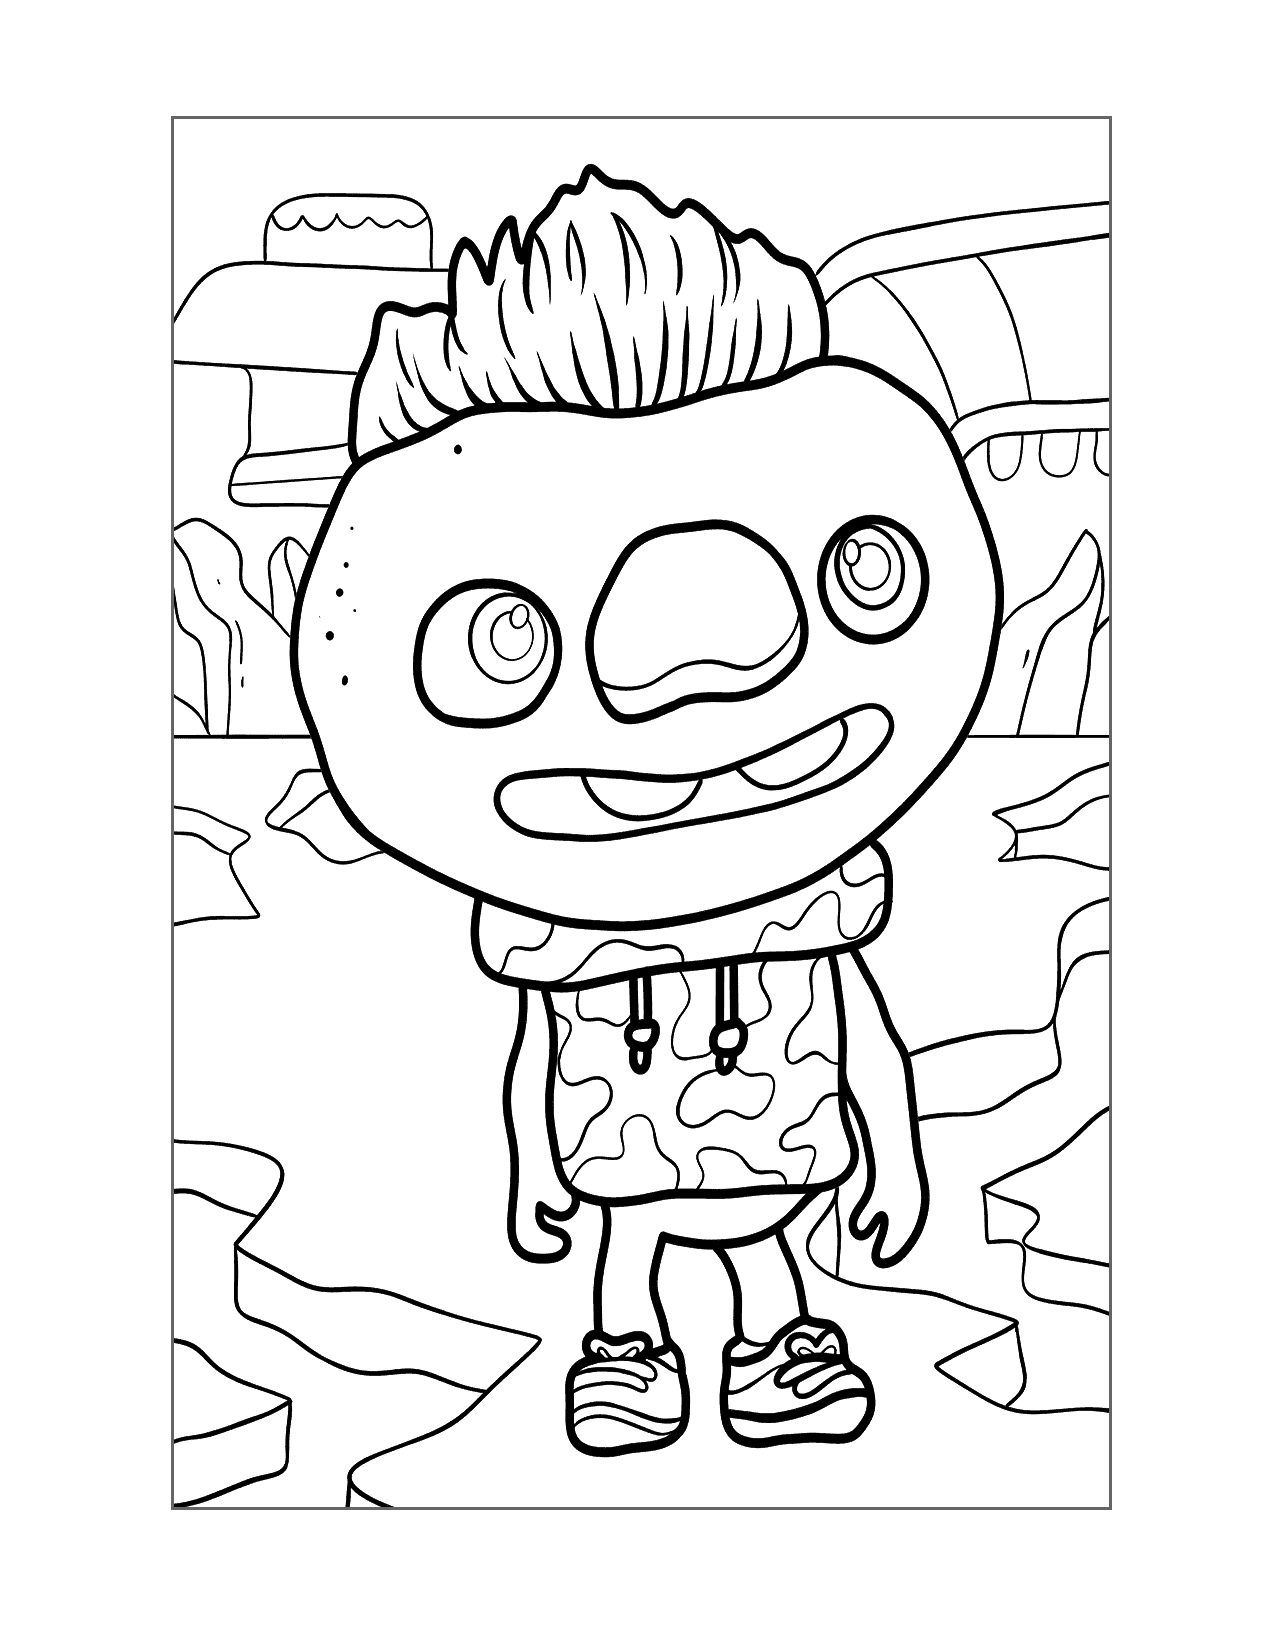 Clod Elemental Coloring Page